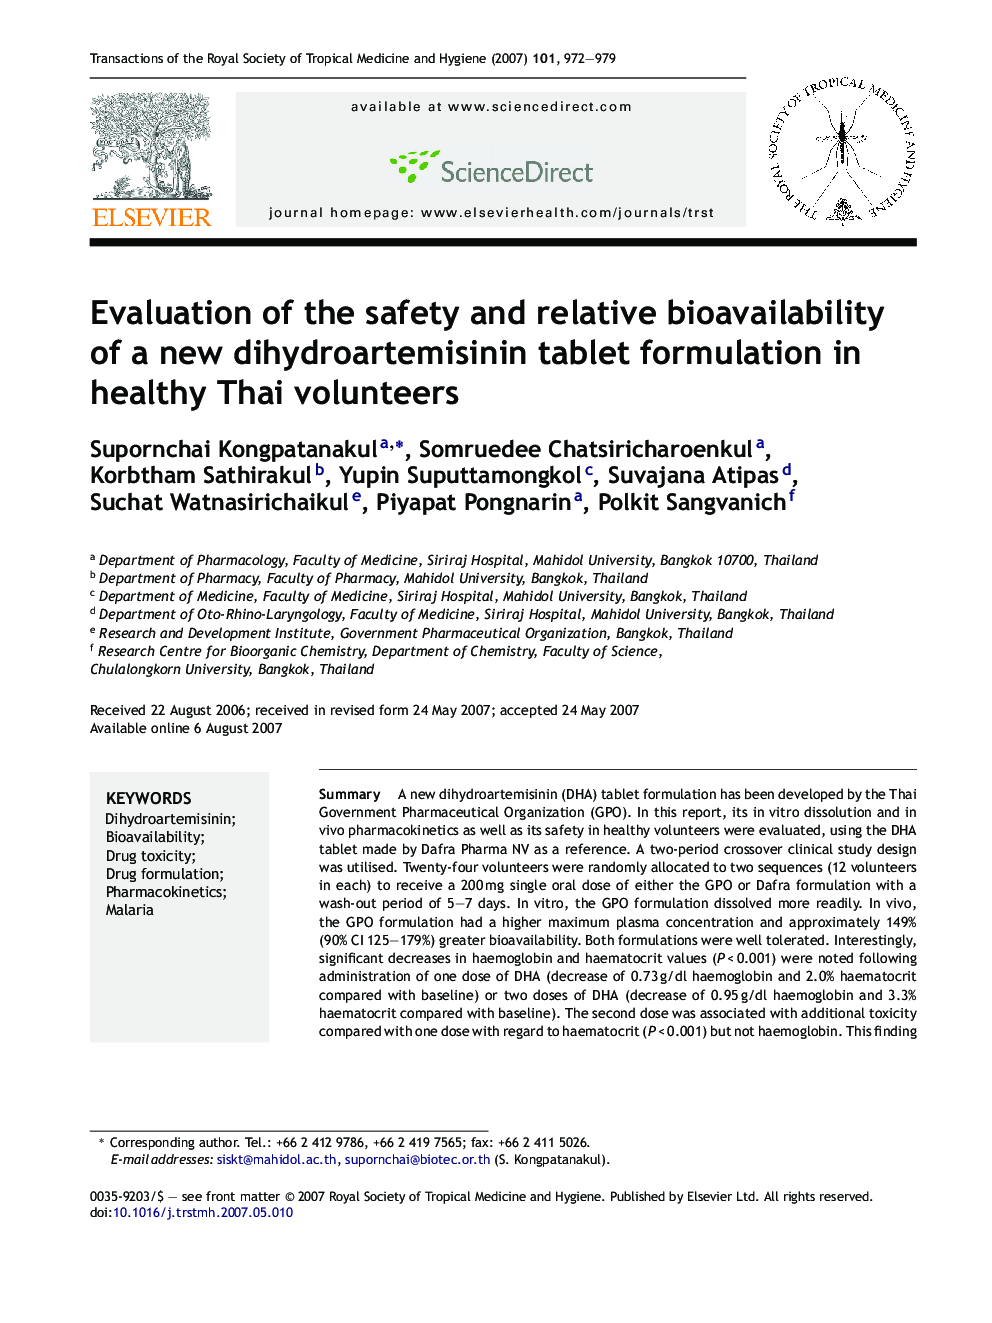 Evaluation of the safety and relative bioavailability of a new dihydroartemisinin tablet formulation in healthy Thai volunteers